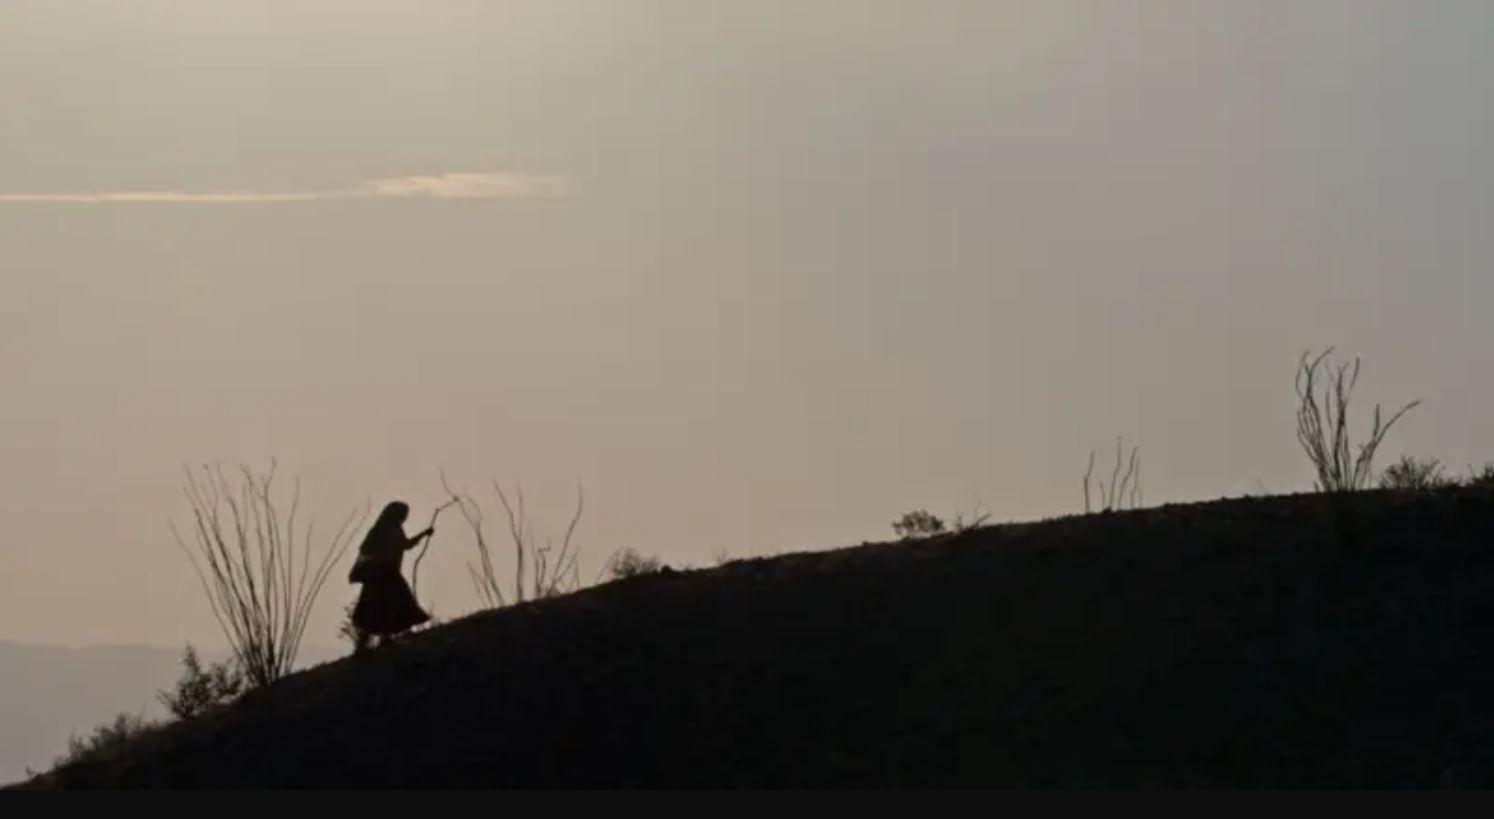 A silhouette image of a woman wearing a skirt and carrying a stick walking uphill 